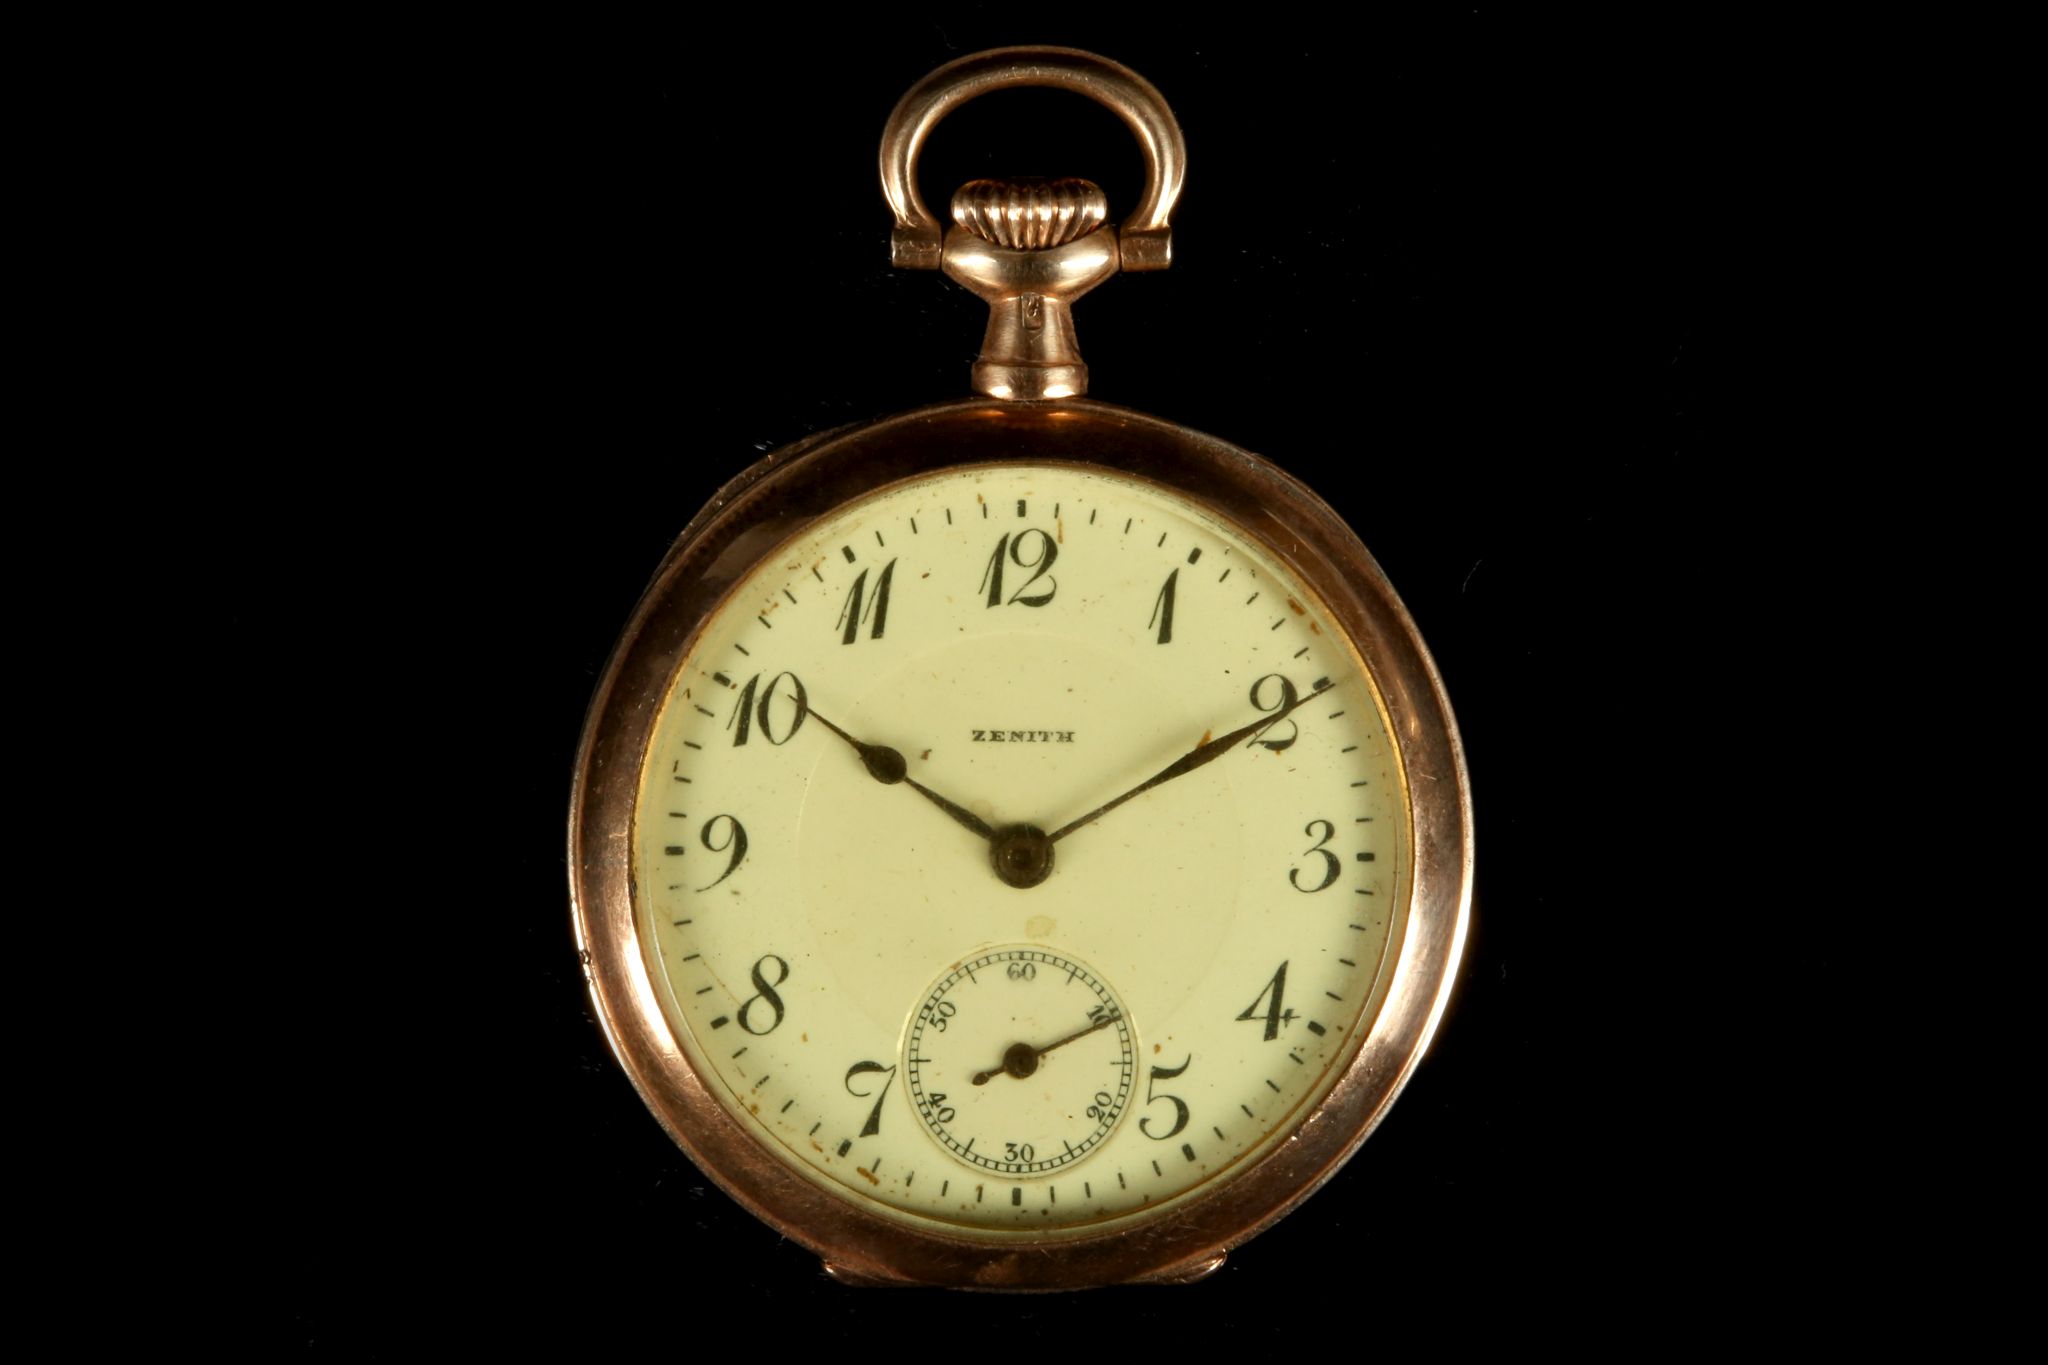 An early 20th Century 14k gold cased Zenith fob watch, with Arabic chapter dial, sub-seconds dial